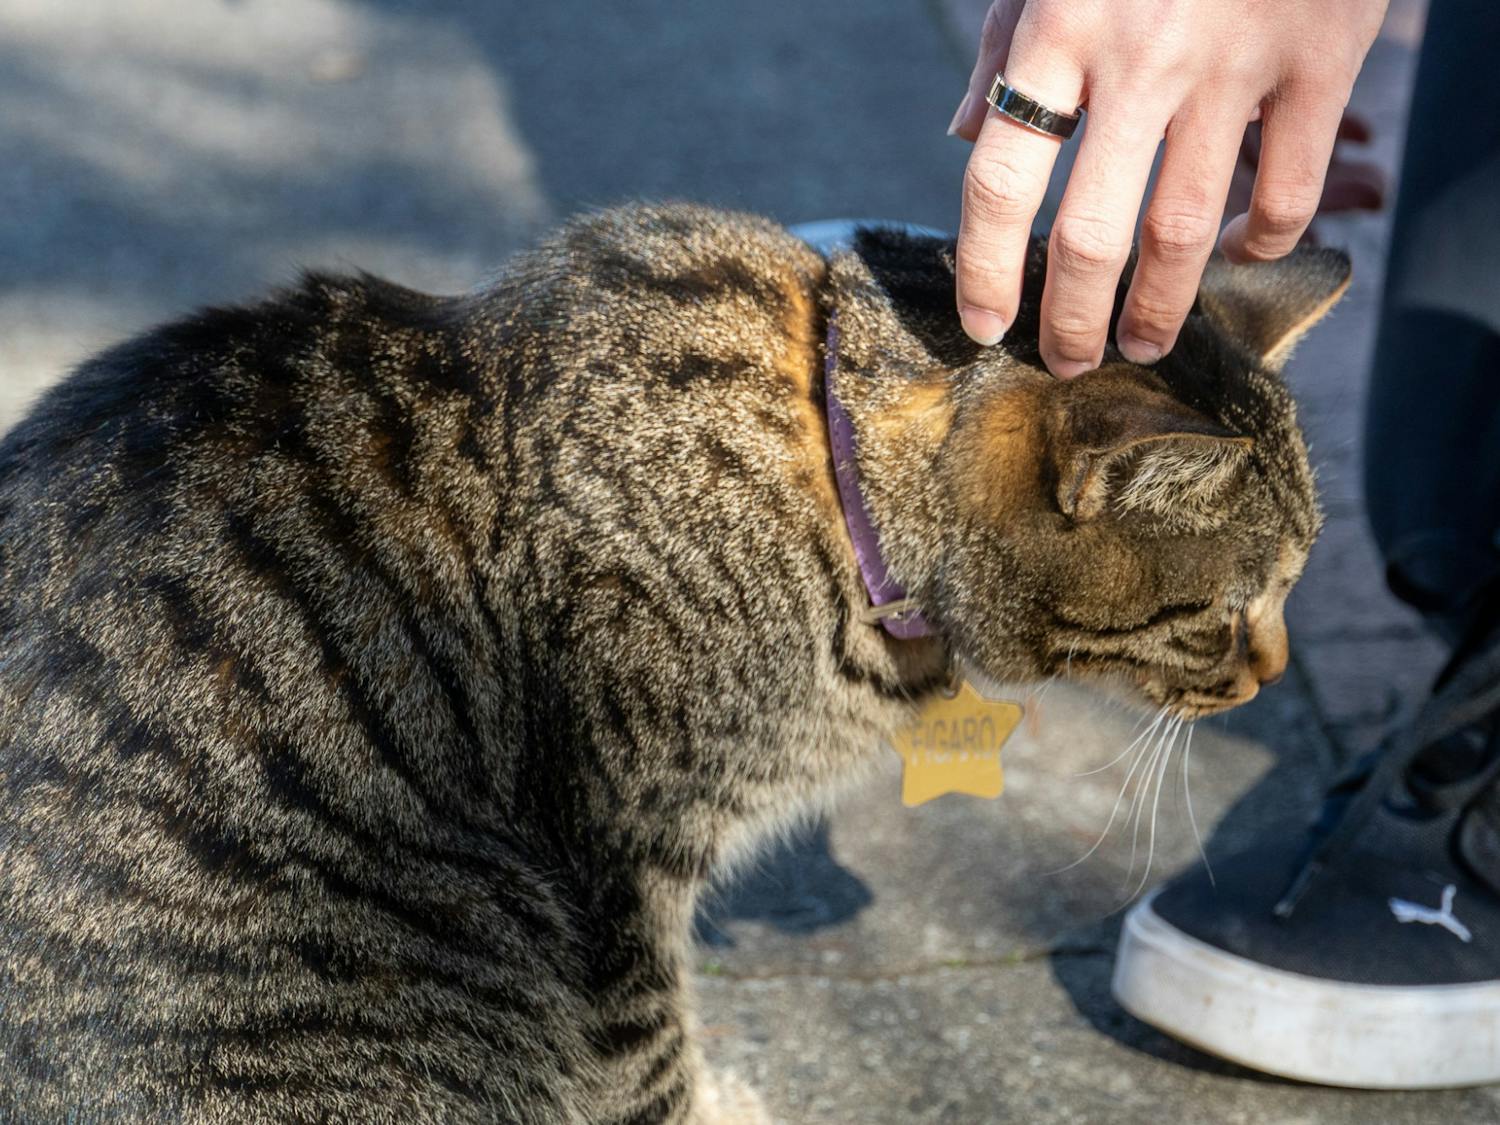 The Carolina campus is home to several animals including birds, squirrels and cats. Students walk from class to class in pathways inhabited by a wide variety of cute critters and cats.